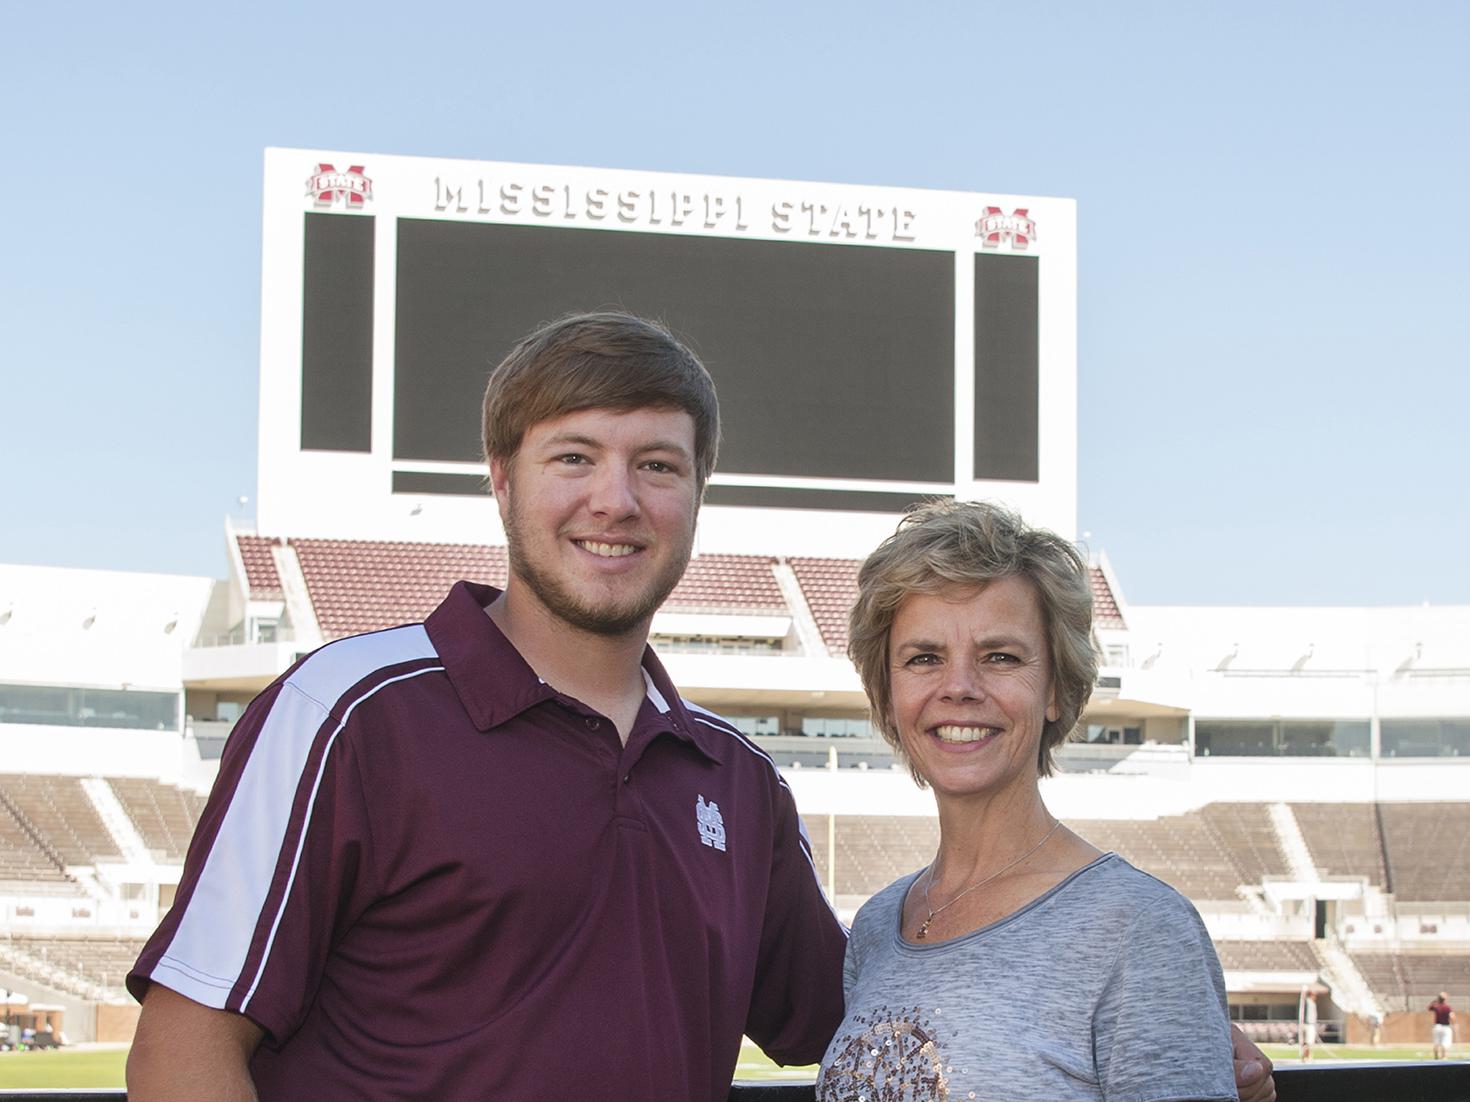 Marjan de Regt, right, a Washington County row crop farmer from the Netherlands, visits her son, Skyler, an agribusiness major at Mississippi State University. (Photo by MSU Extension Service/Kat Lawrence)